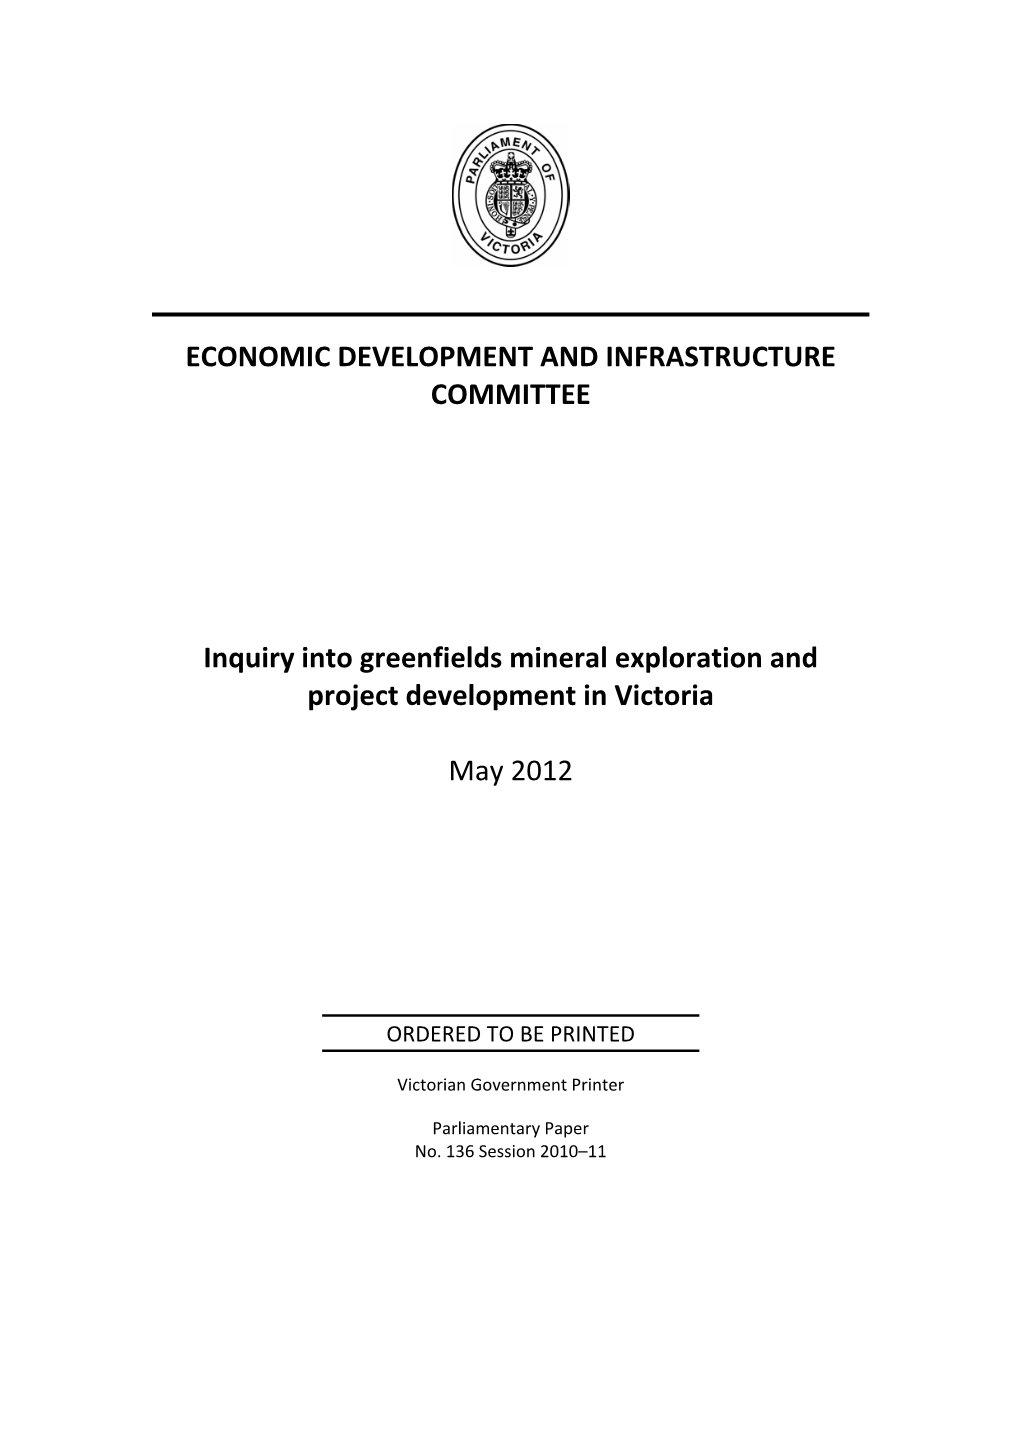 Inquiry Into Greenfields Mineral Exploration and Project Development in Victoria